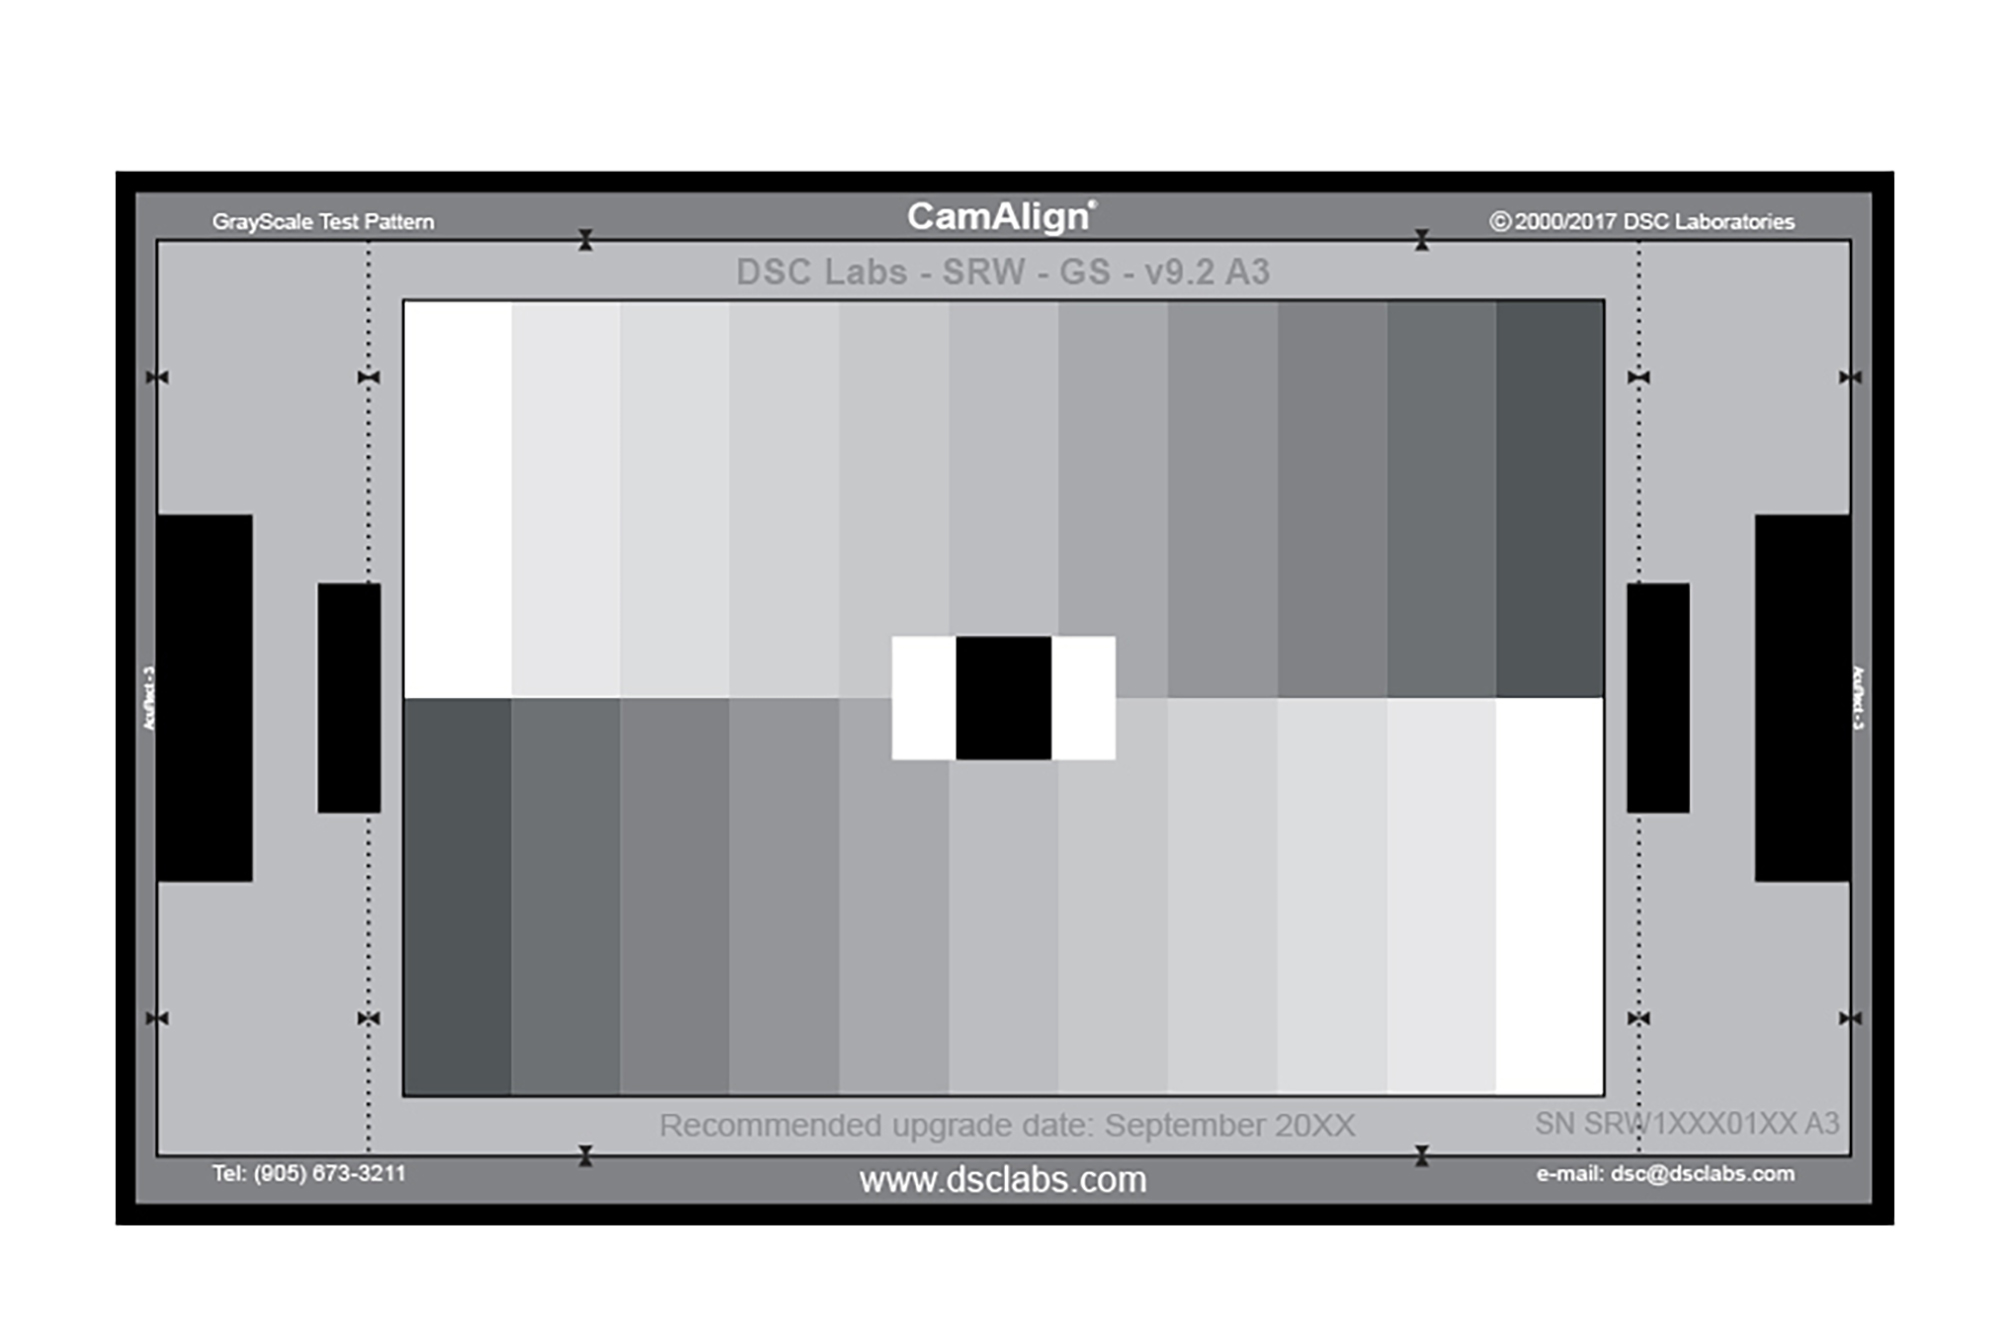 DSC Labs 11 steps GrayScale Junior CamAlign Chip Chart